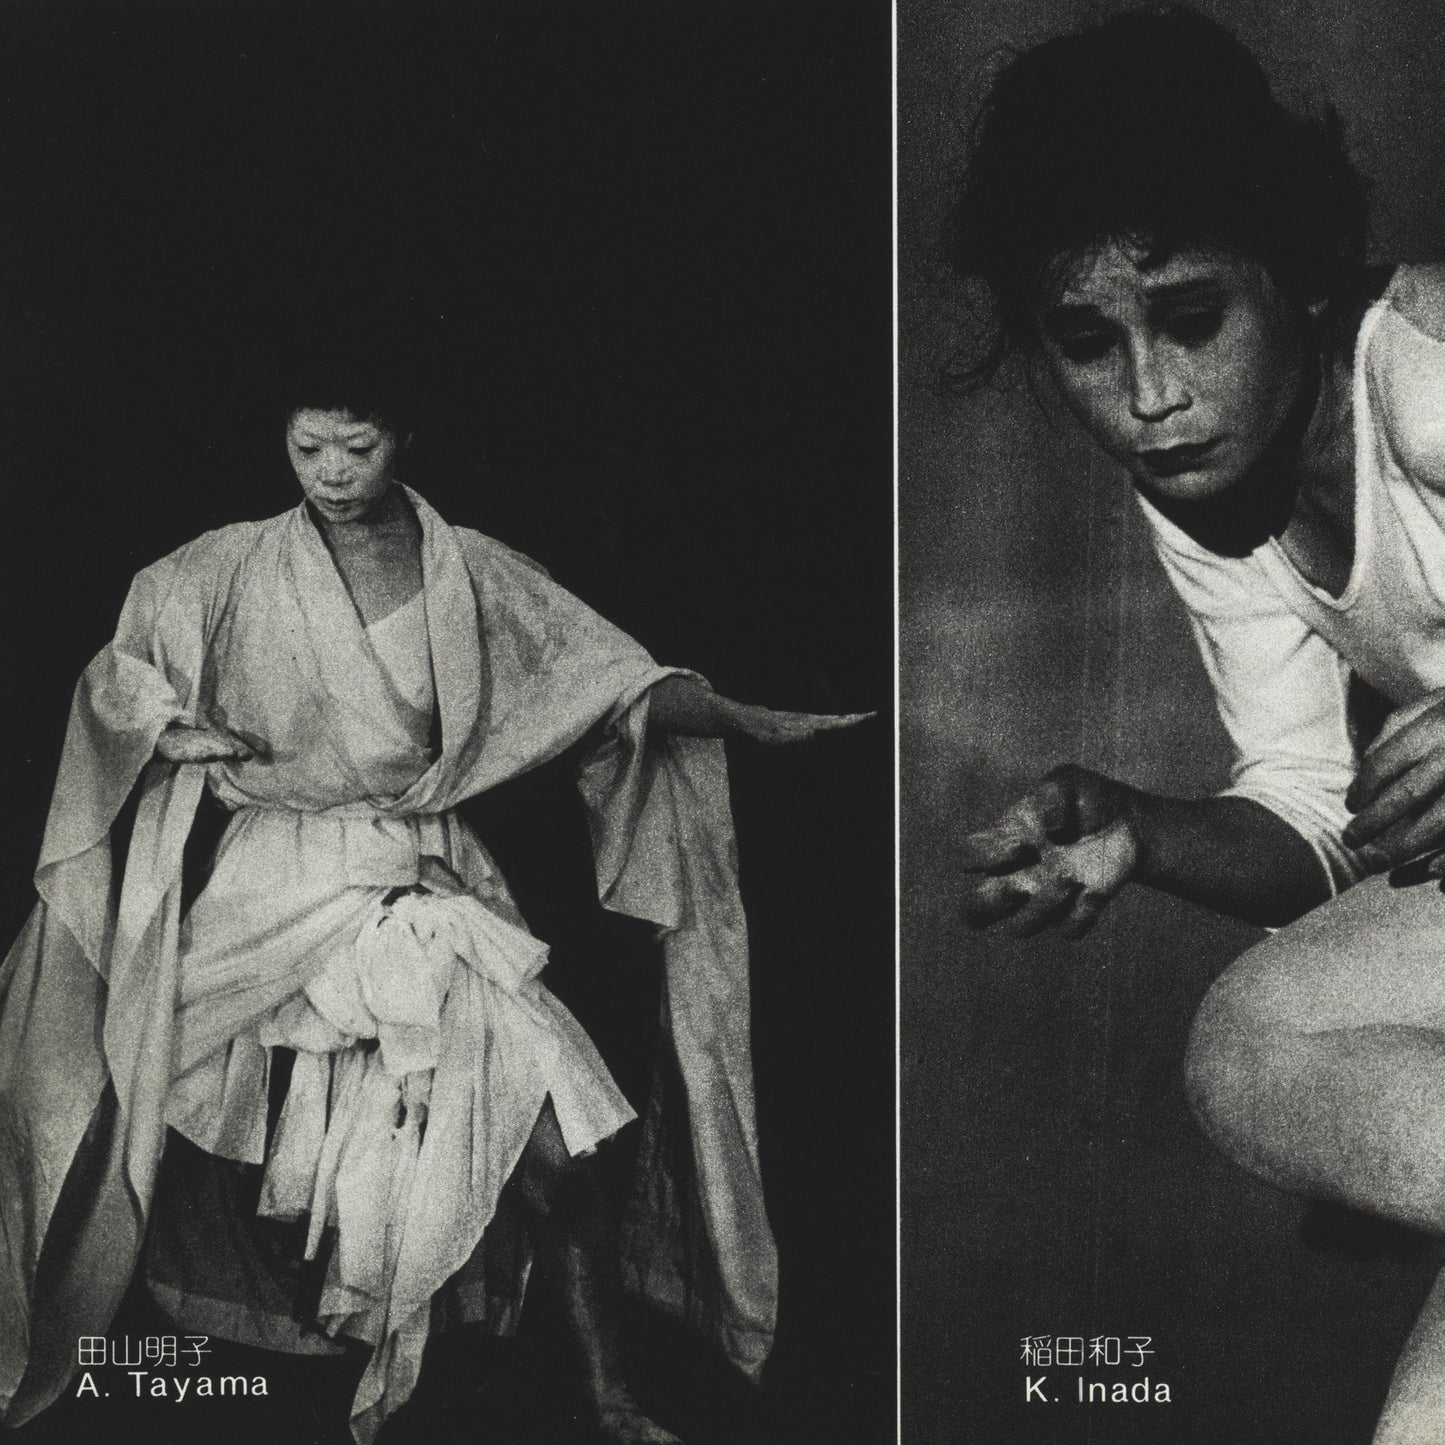 The Butoh